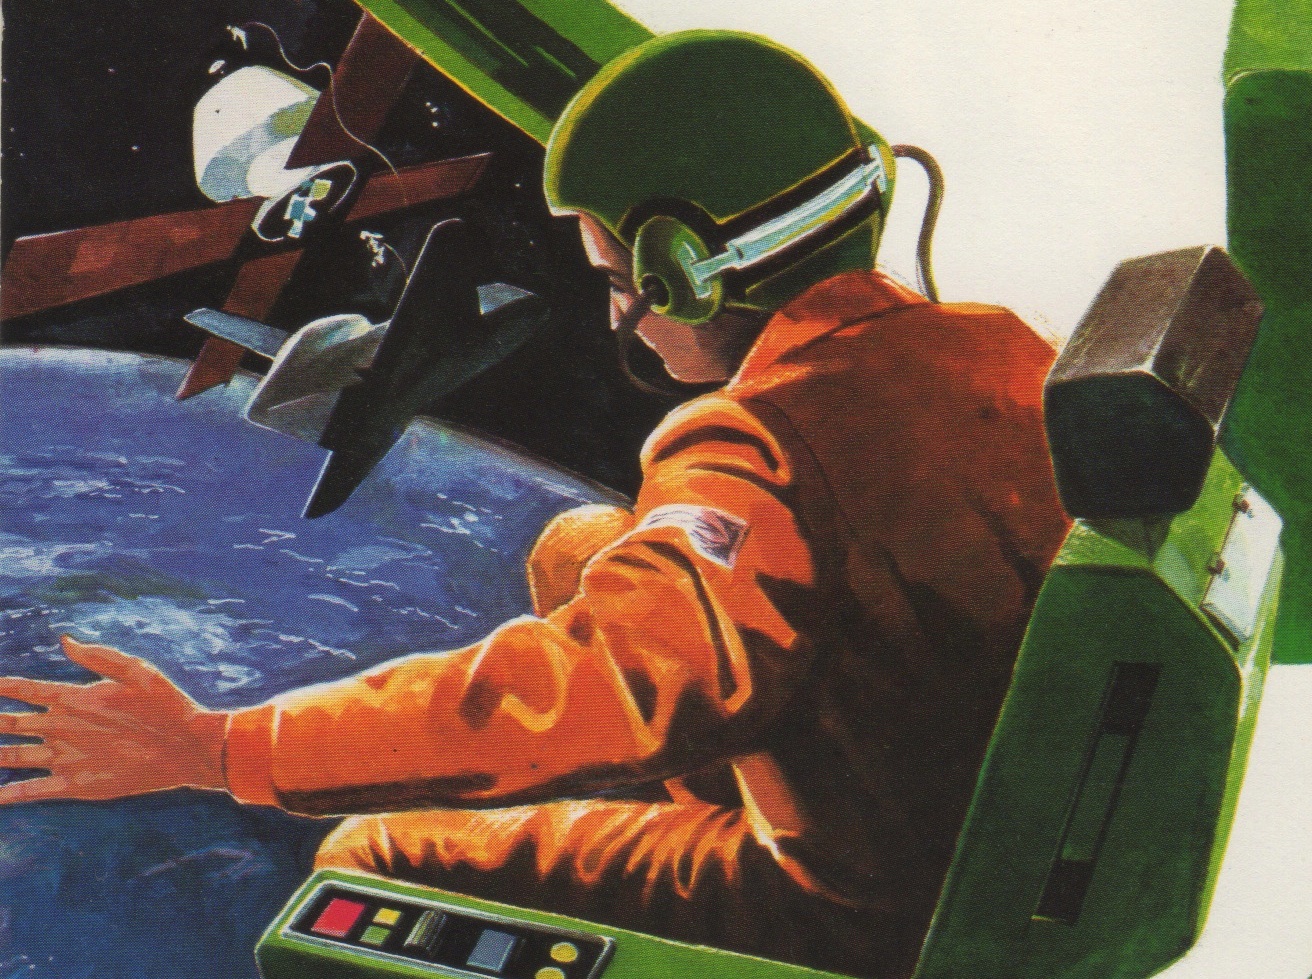 How An ’80s Book For Kids Predicted Today’s Spy Satellites And Cyberwars